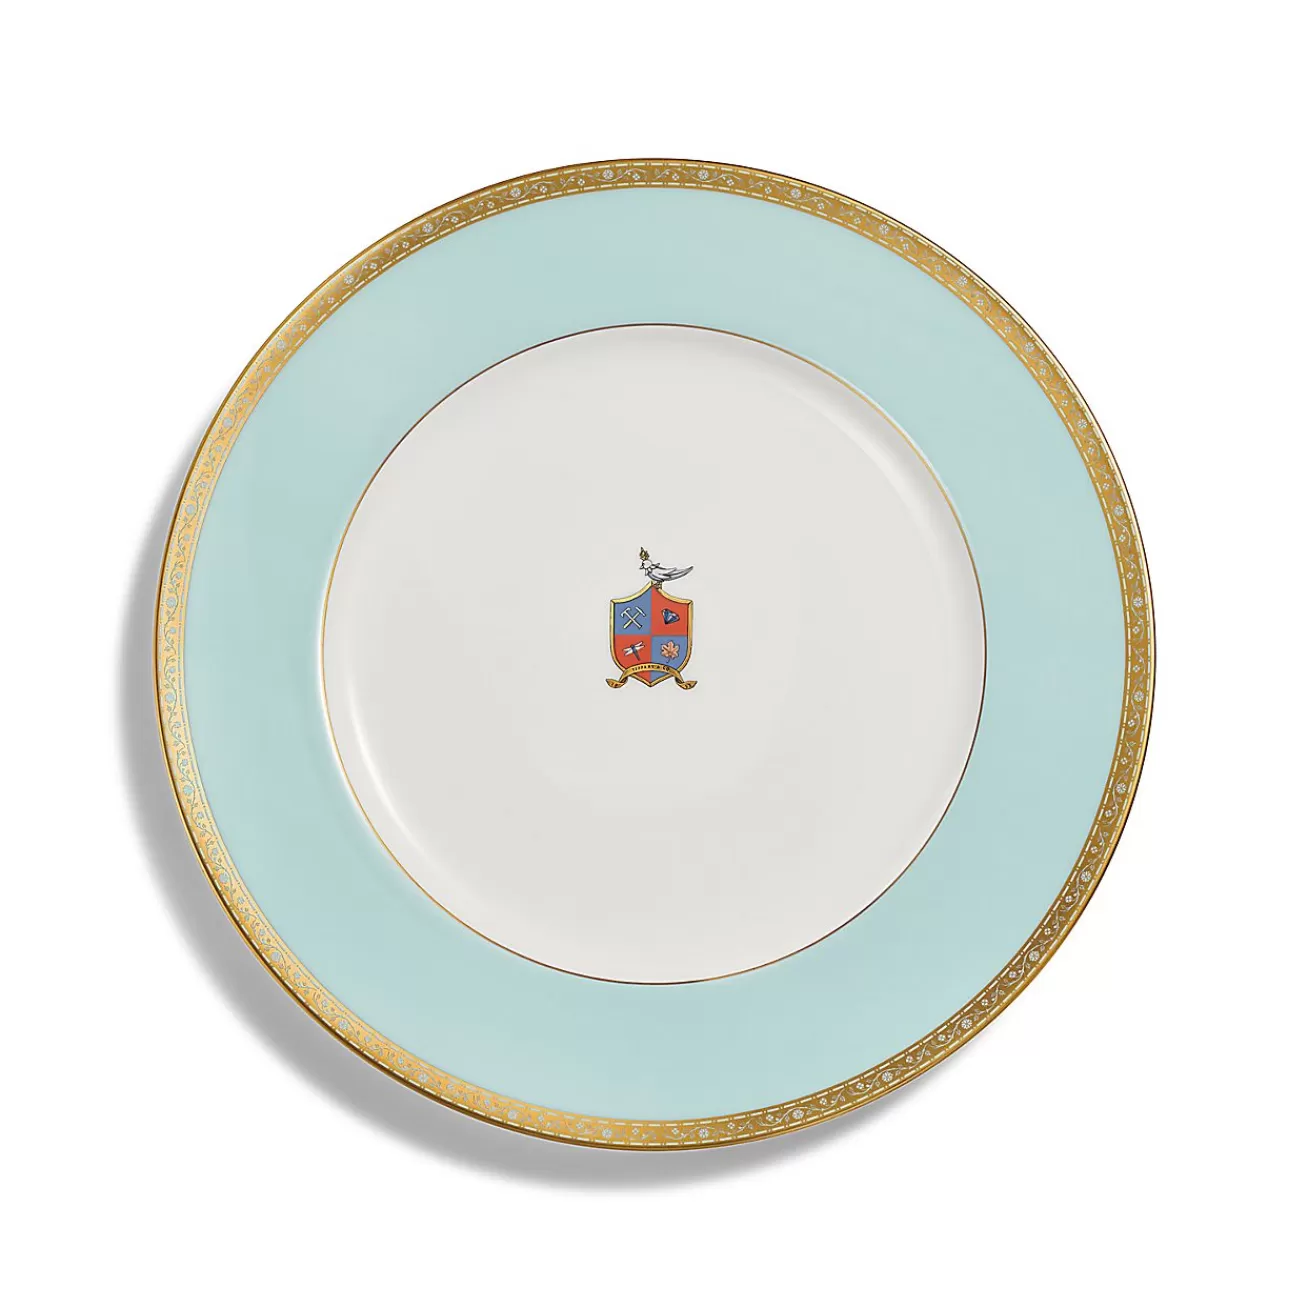 Tiffany & Co. Tiffany Crest Dinner Plate in Bone China | ^ The Home | Housewarming Gifts